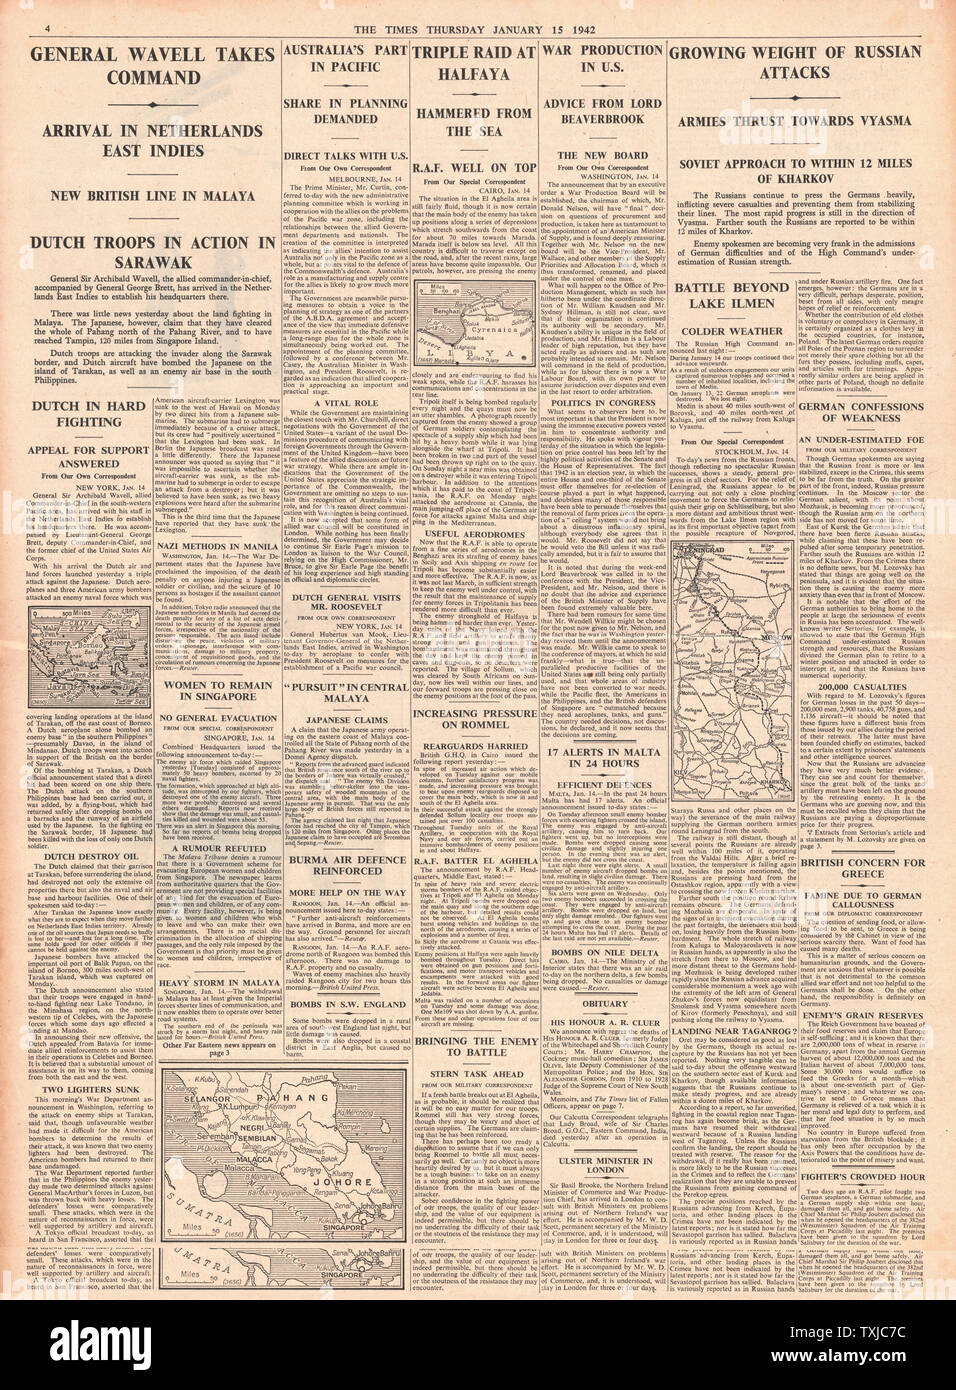 1942 page 4  The Times General Wavell takes command in Far East, RAF bomb Halfaya and Russian Army continue adavance on Kharkov Stock Photo